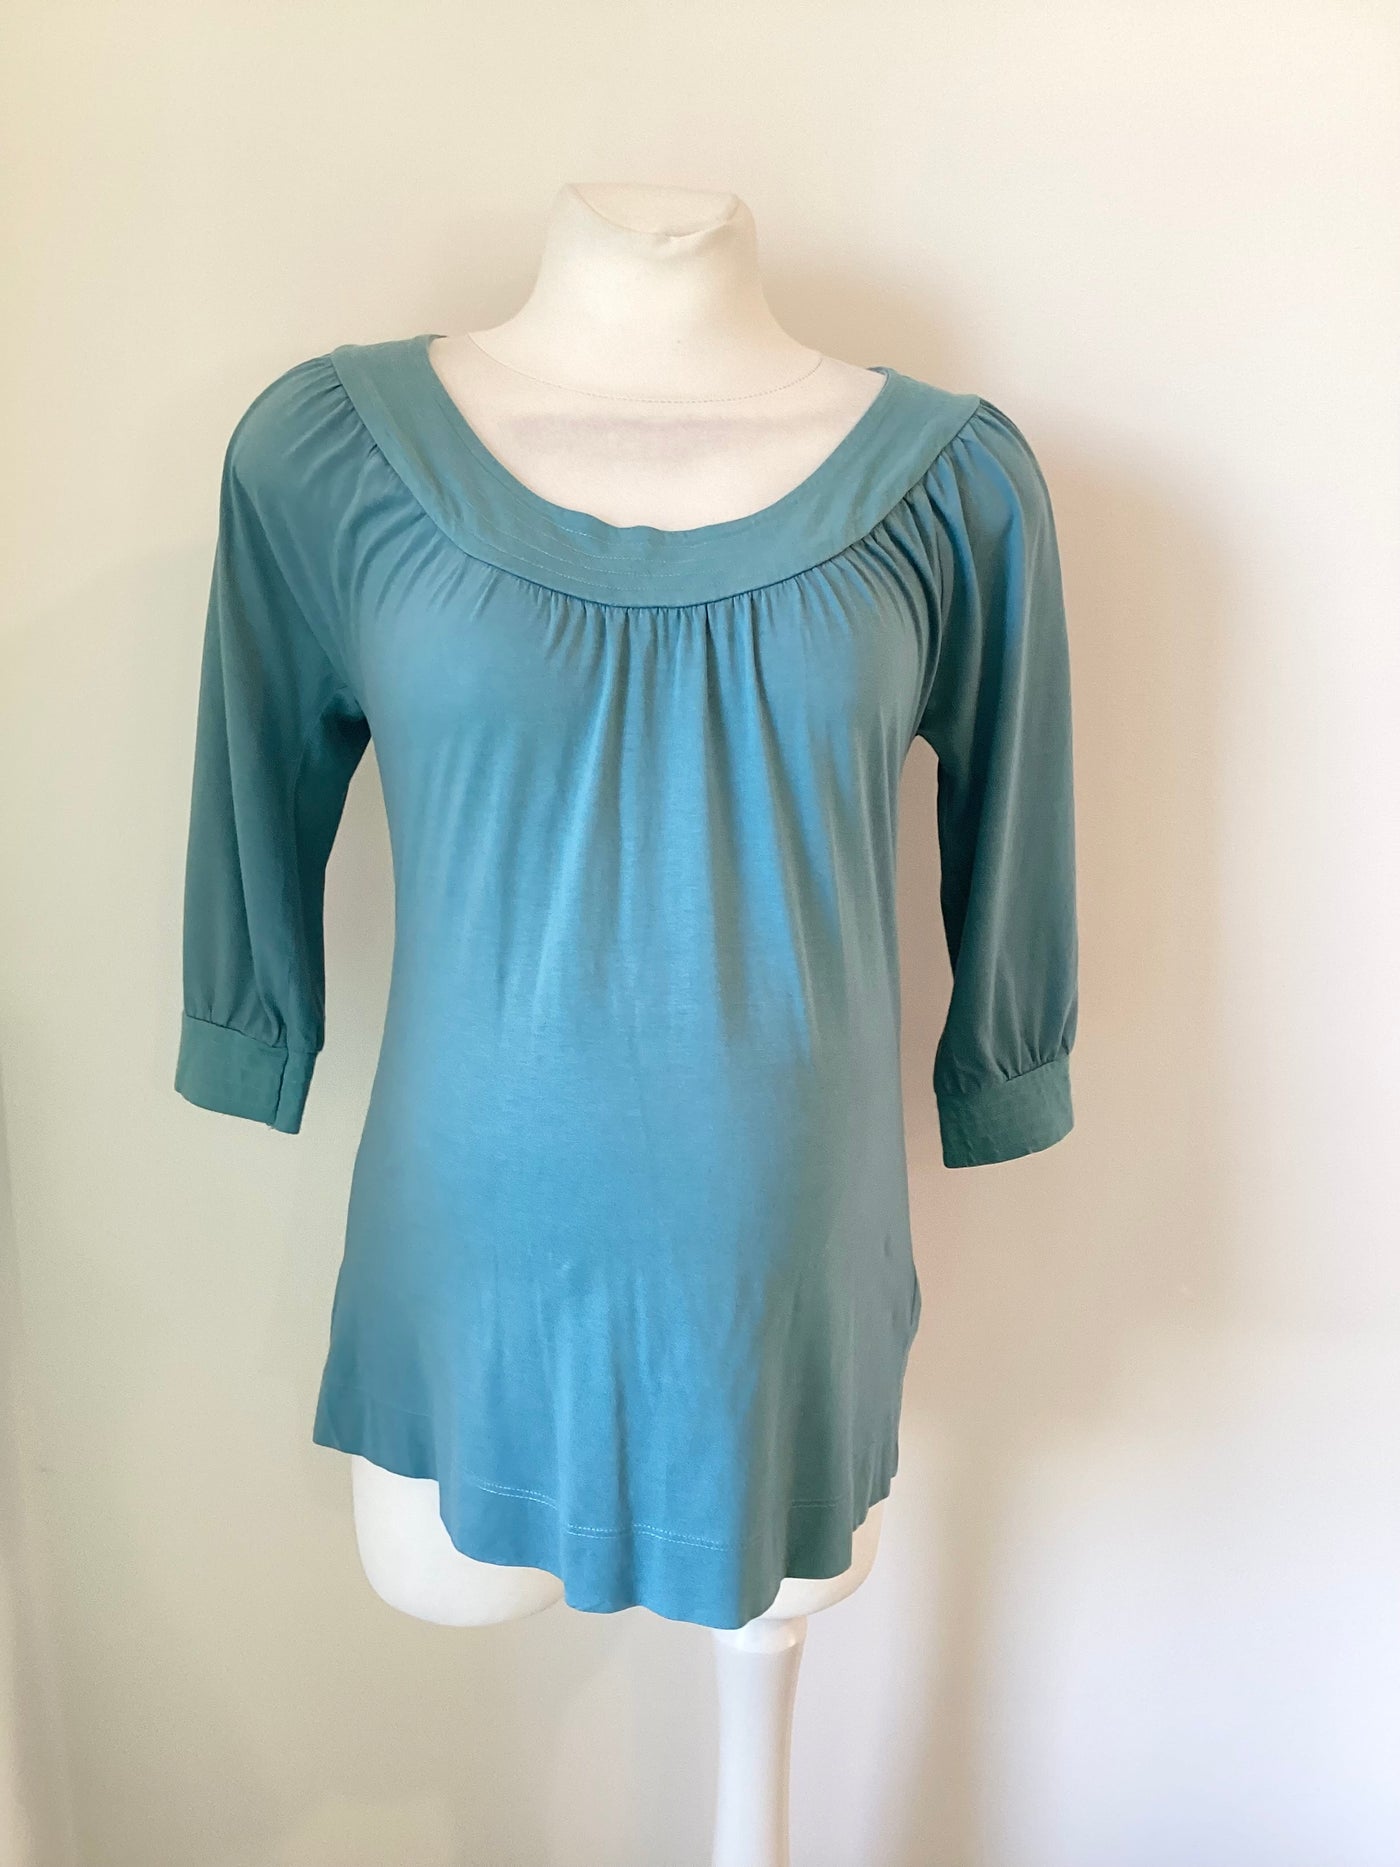 New Look Maternity cyan blue 3/4 sleeve top - Size 10